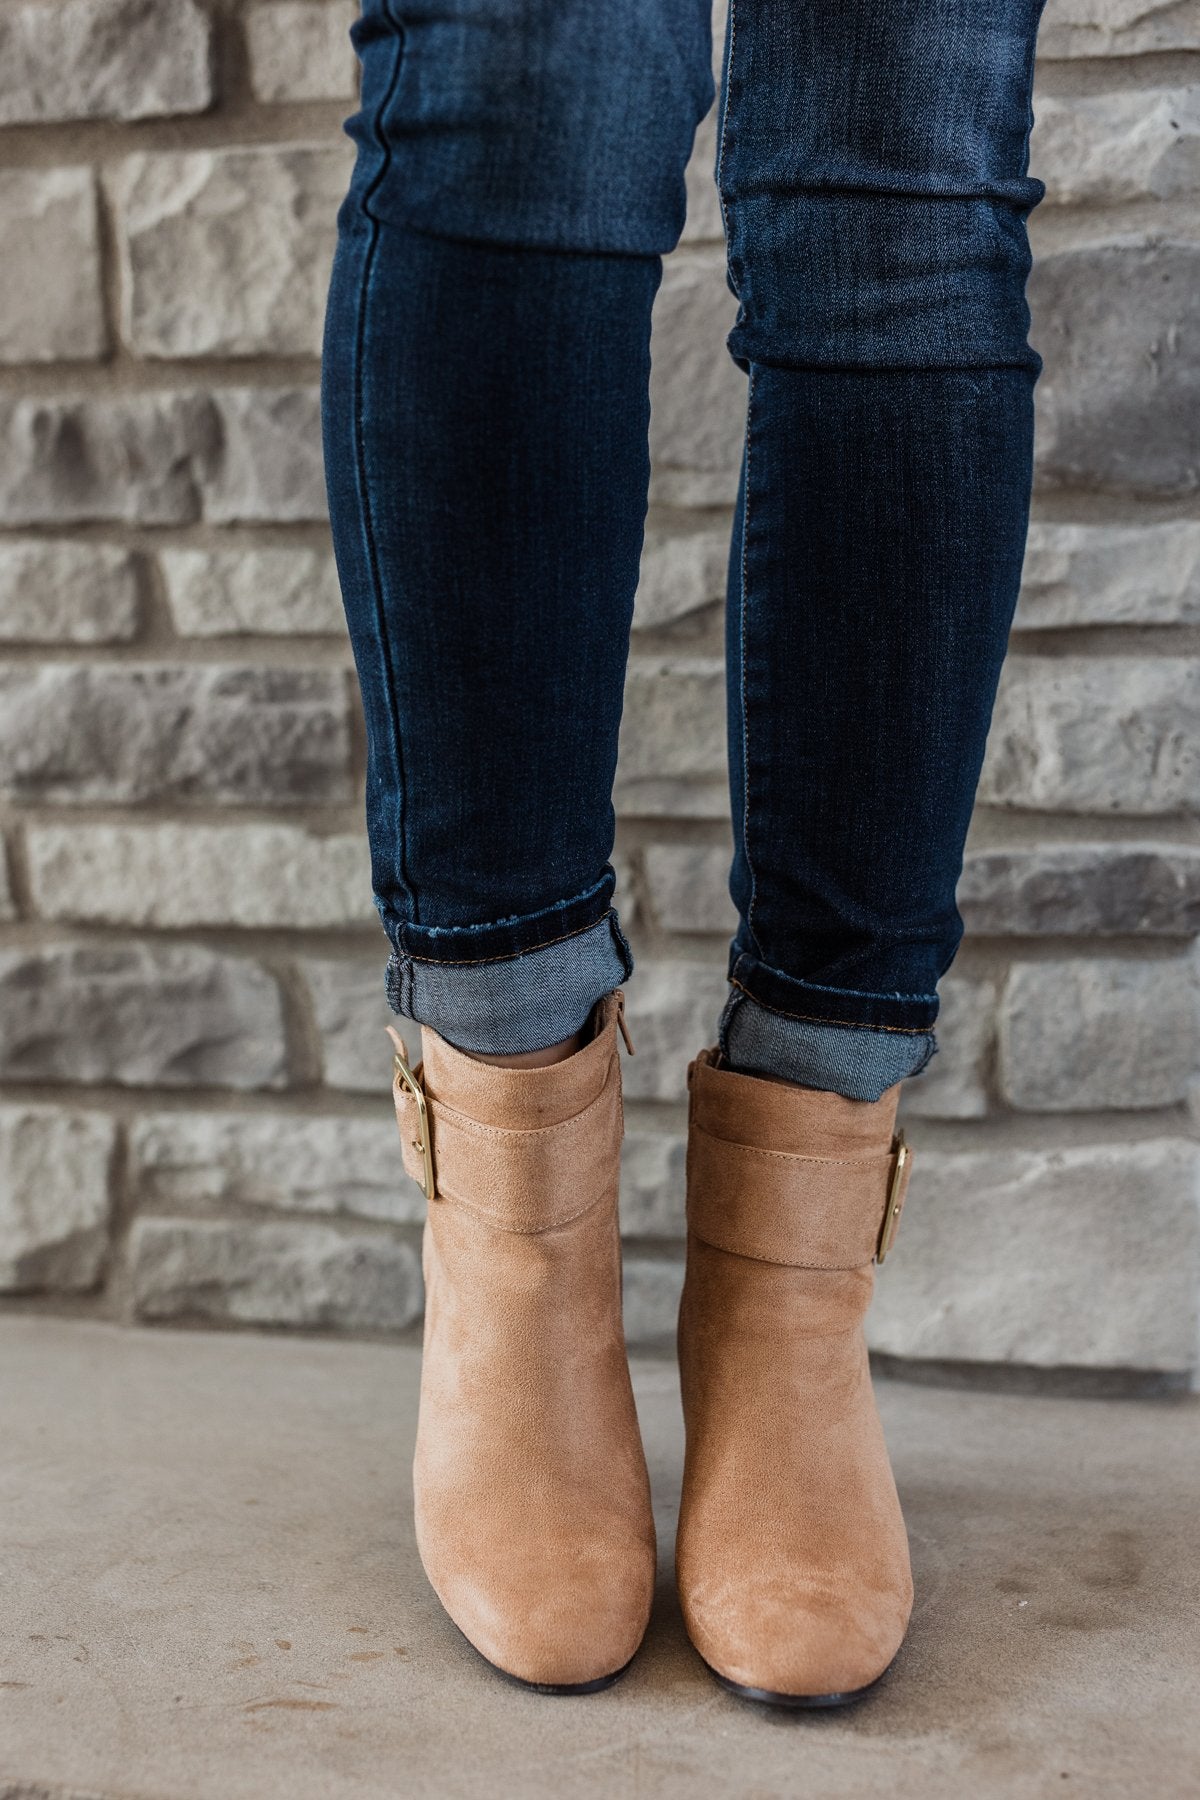 Qupid Malone Heels- Warm Taupe Suede